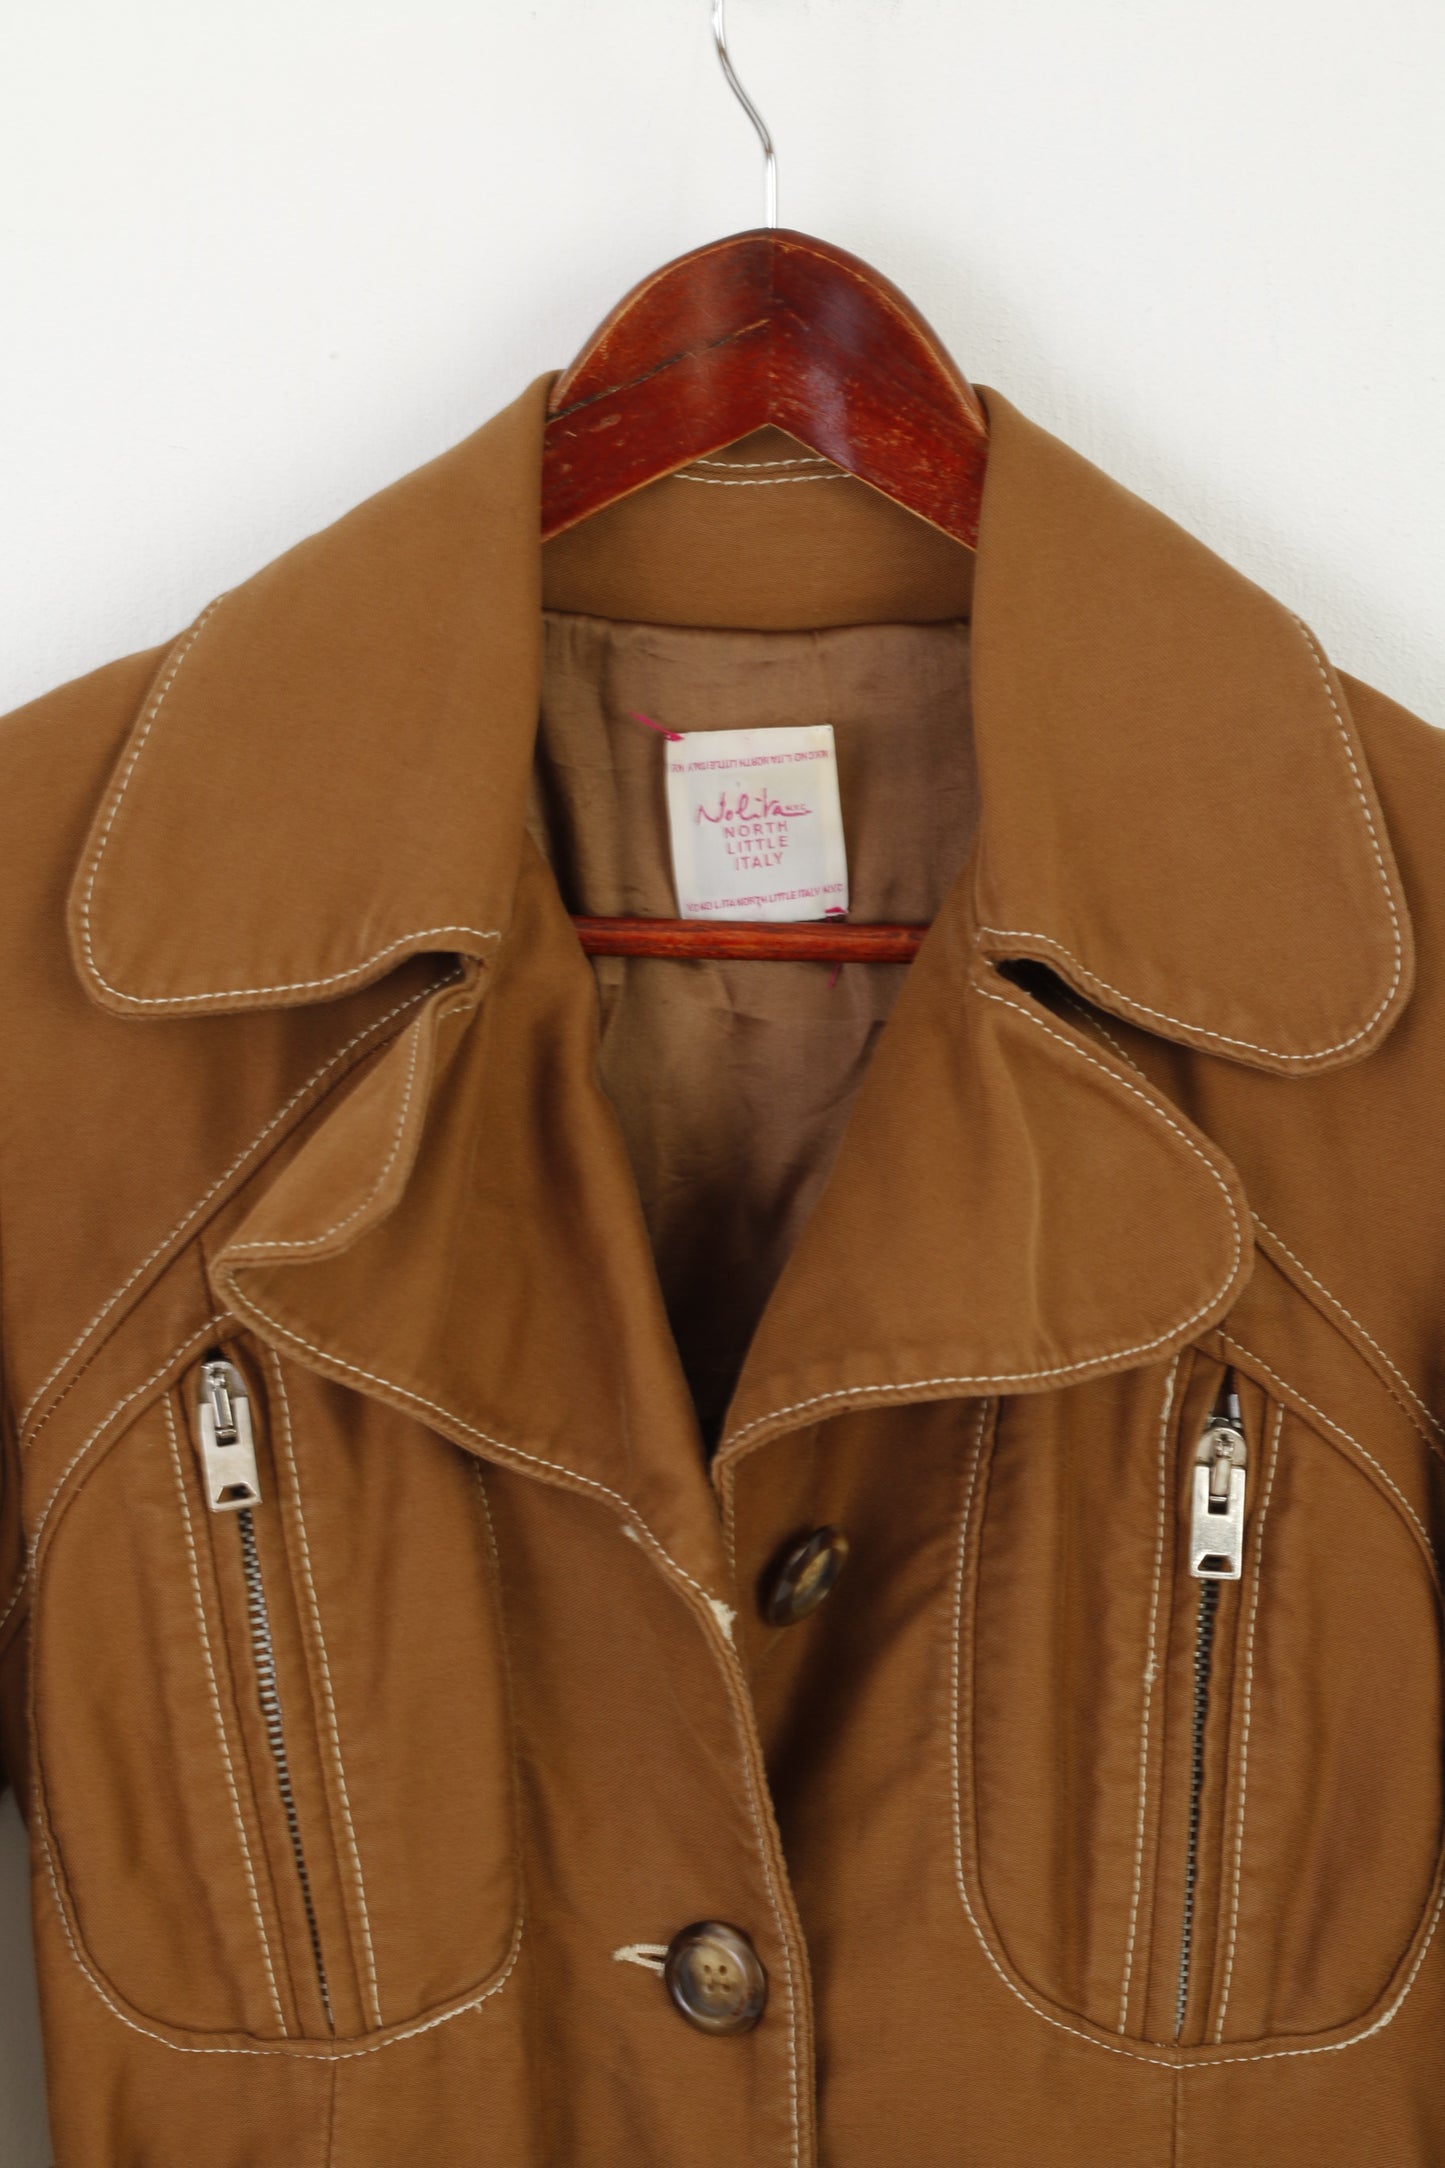 Nolita North Little Italy Women 42 S Coat Brown Cotton Trench Belted Multi Pocket Top